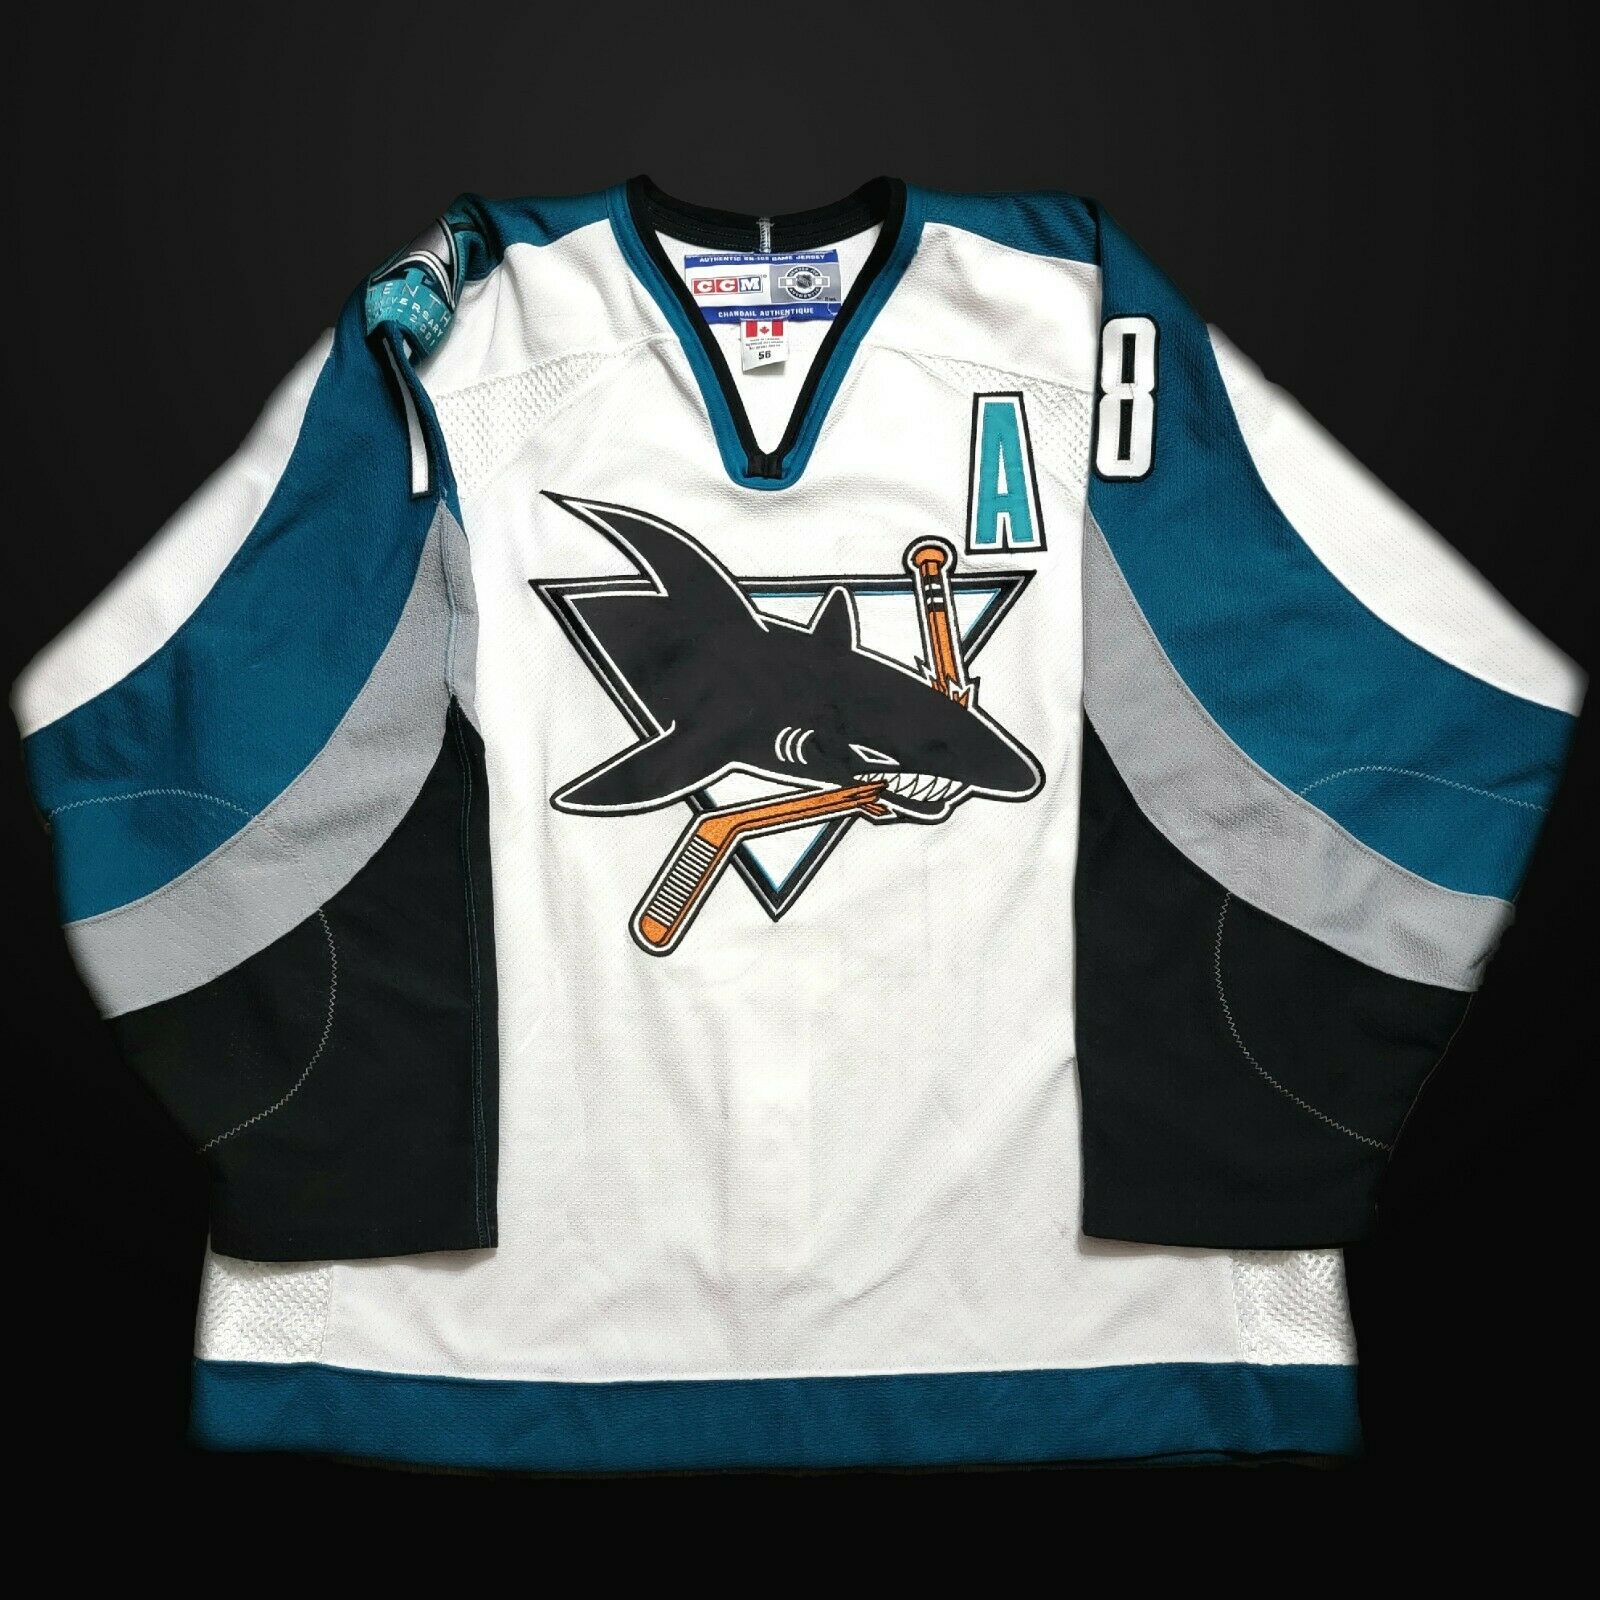 SJ SHARKS AUTOGRAPHED 10th ANNIVERSARY JERSEY ON ICE GAME JERSEY RARE!